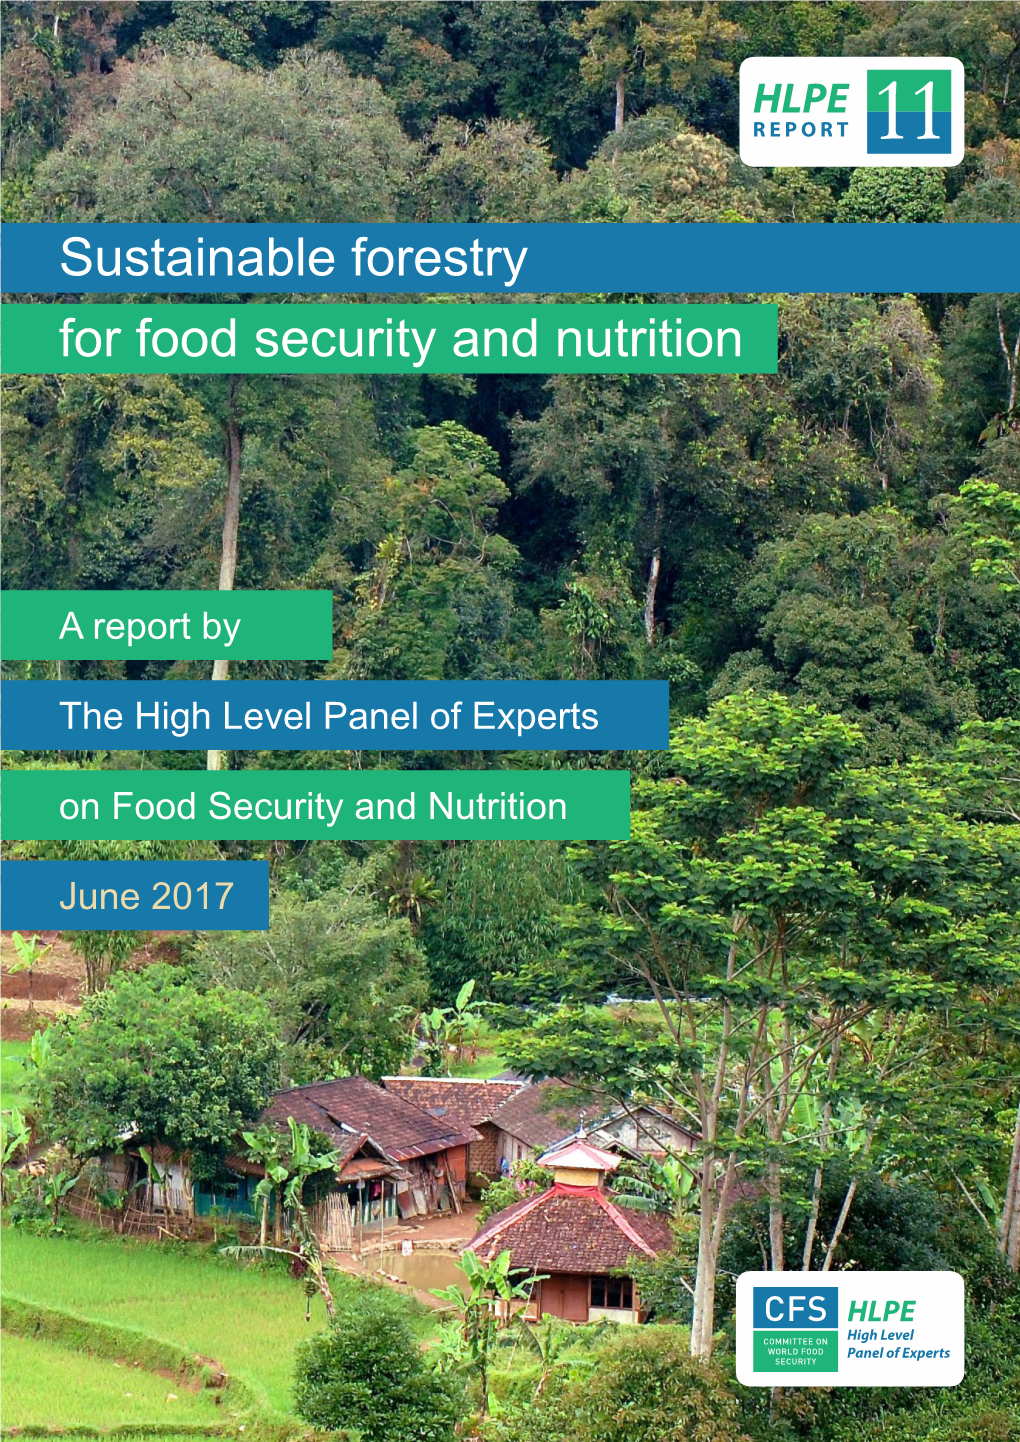 HLPE. 2017. Sustainable Forestry for Food Security and Nutrition. a Report